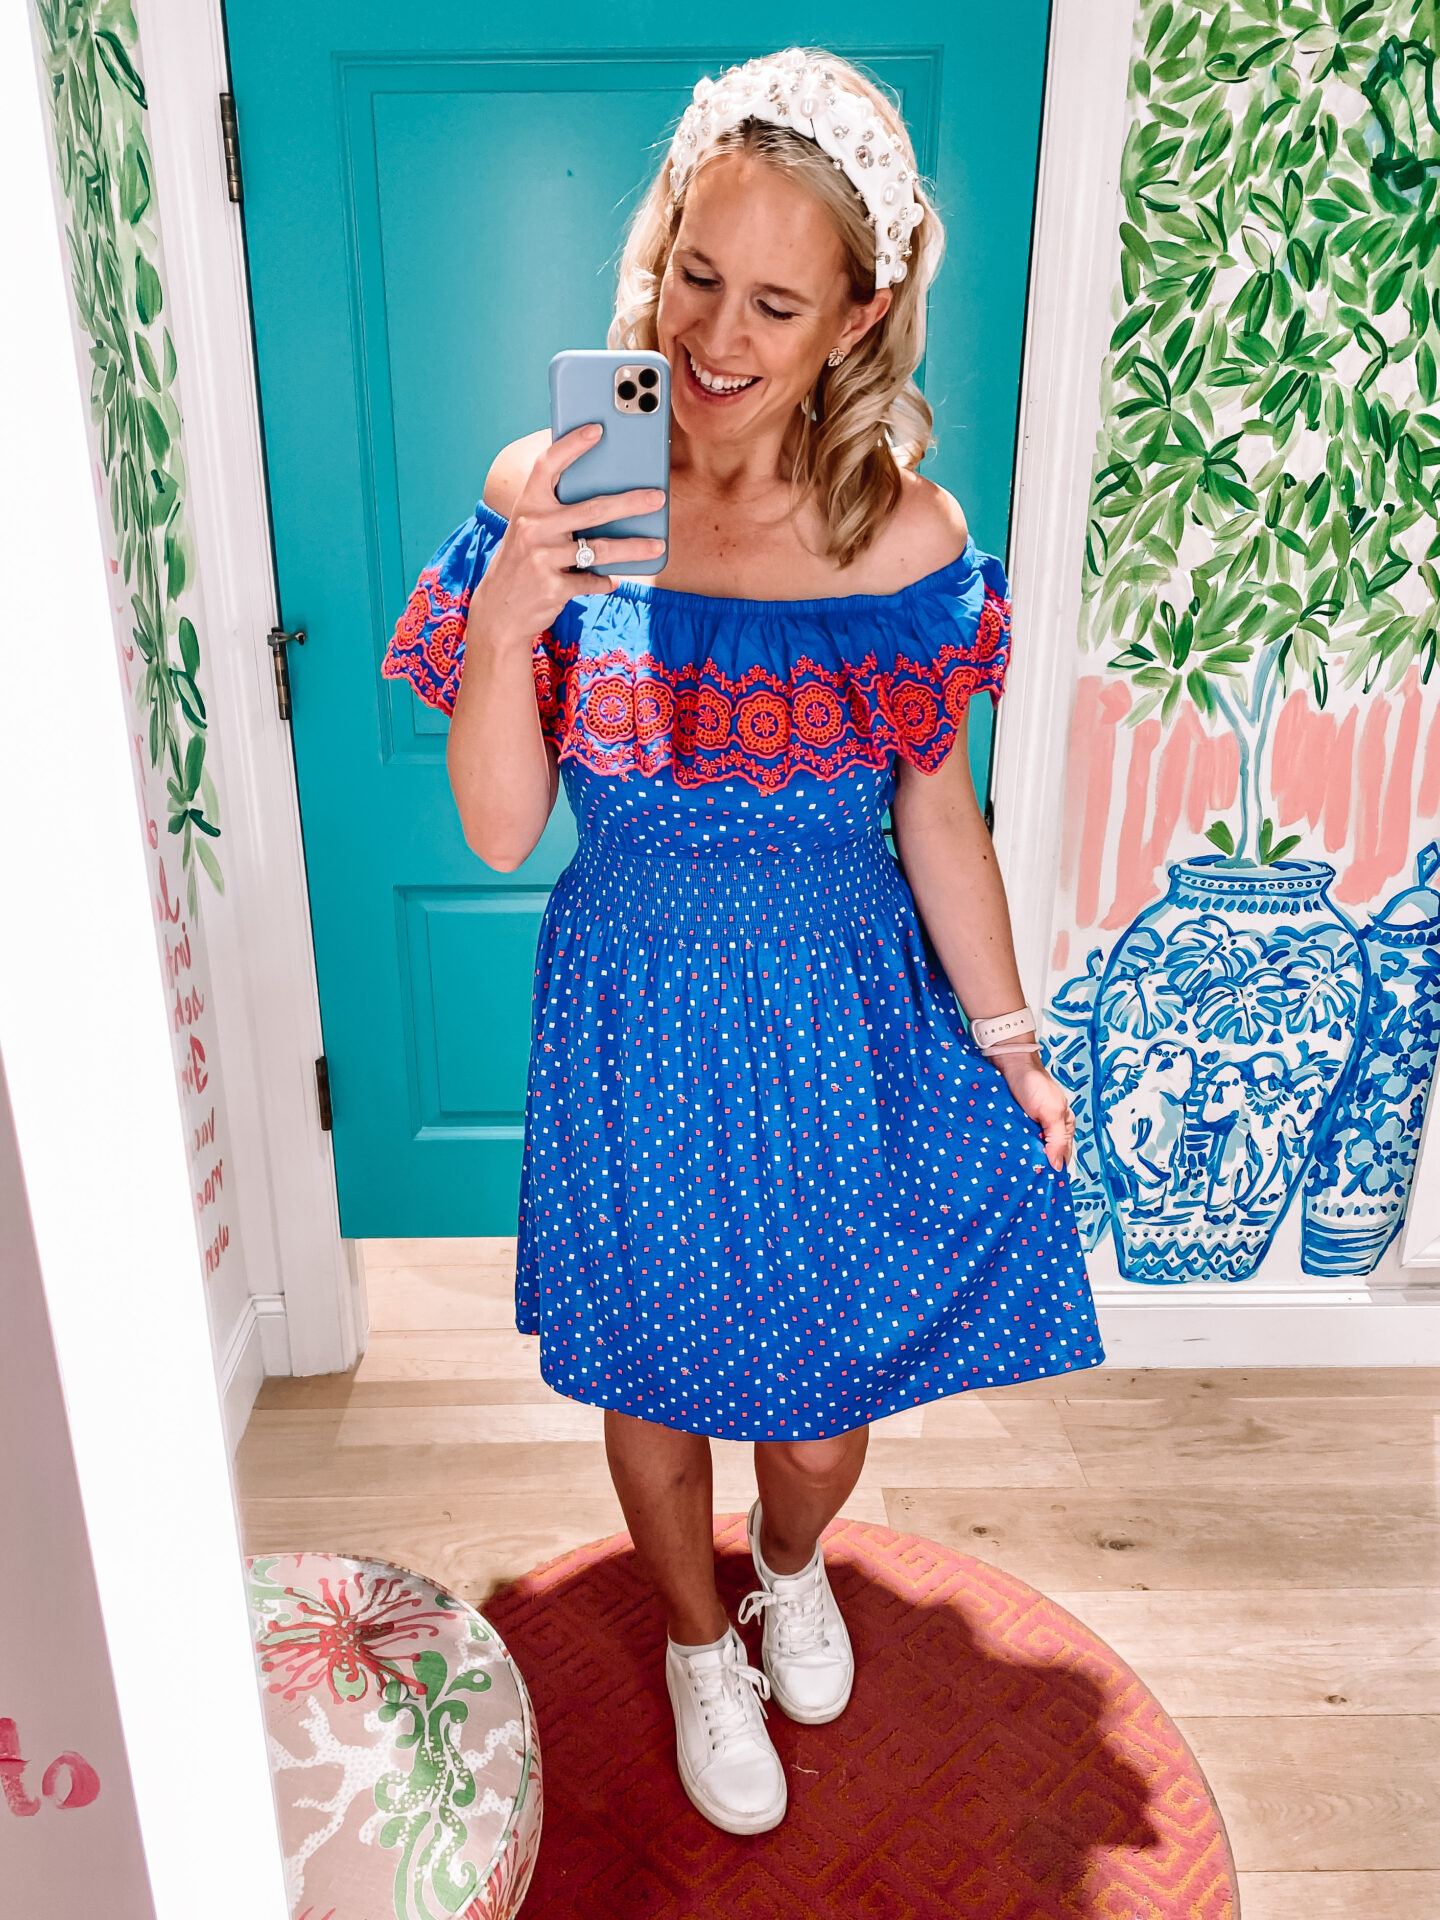 Summer 2022 Lilly Sunshine Sale Predictions | Lilly Pulitzer summer sale and dresses